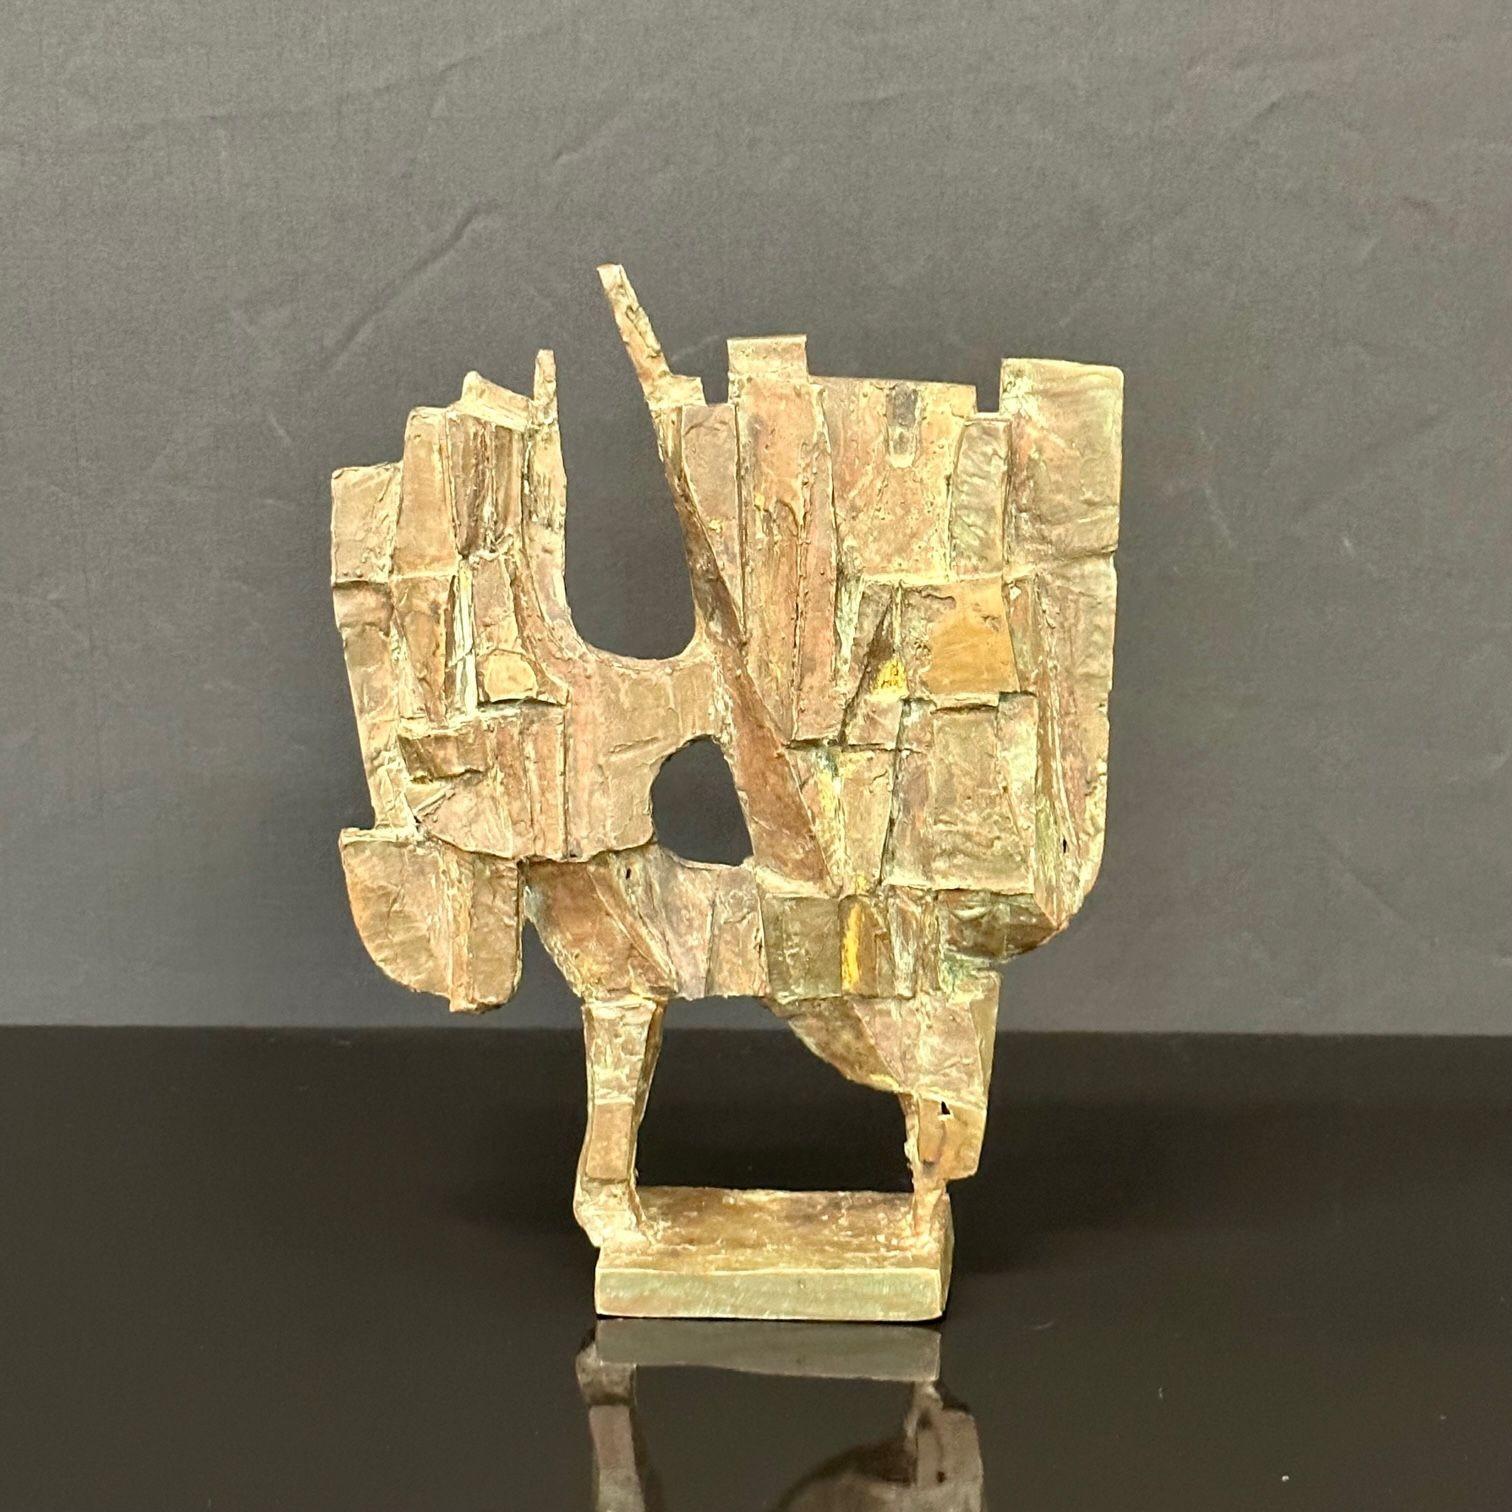 Midcentury Brutalist Abstract Sculpture, Patinated Bronze Decorative Art Object In Good Condition For Sale In Stamford, CT